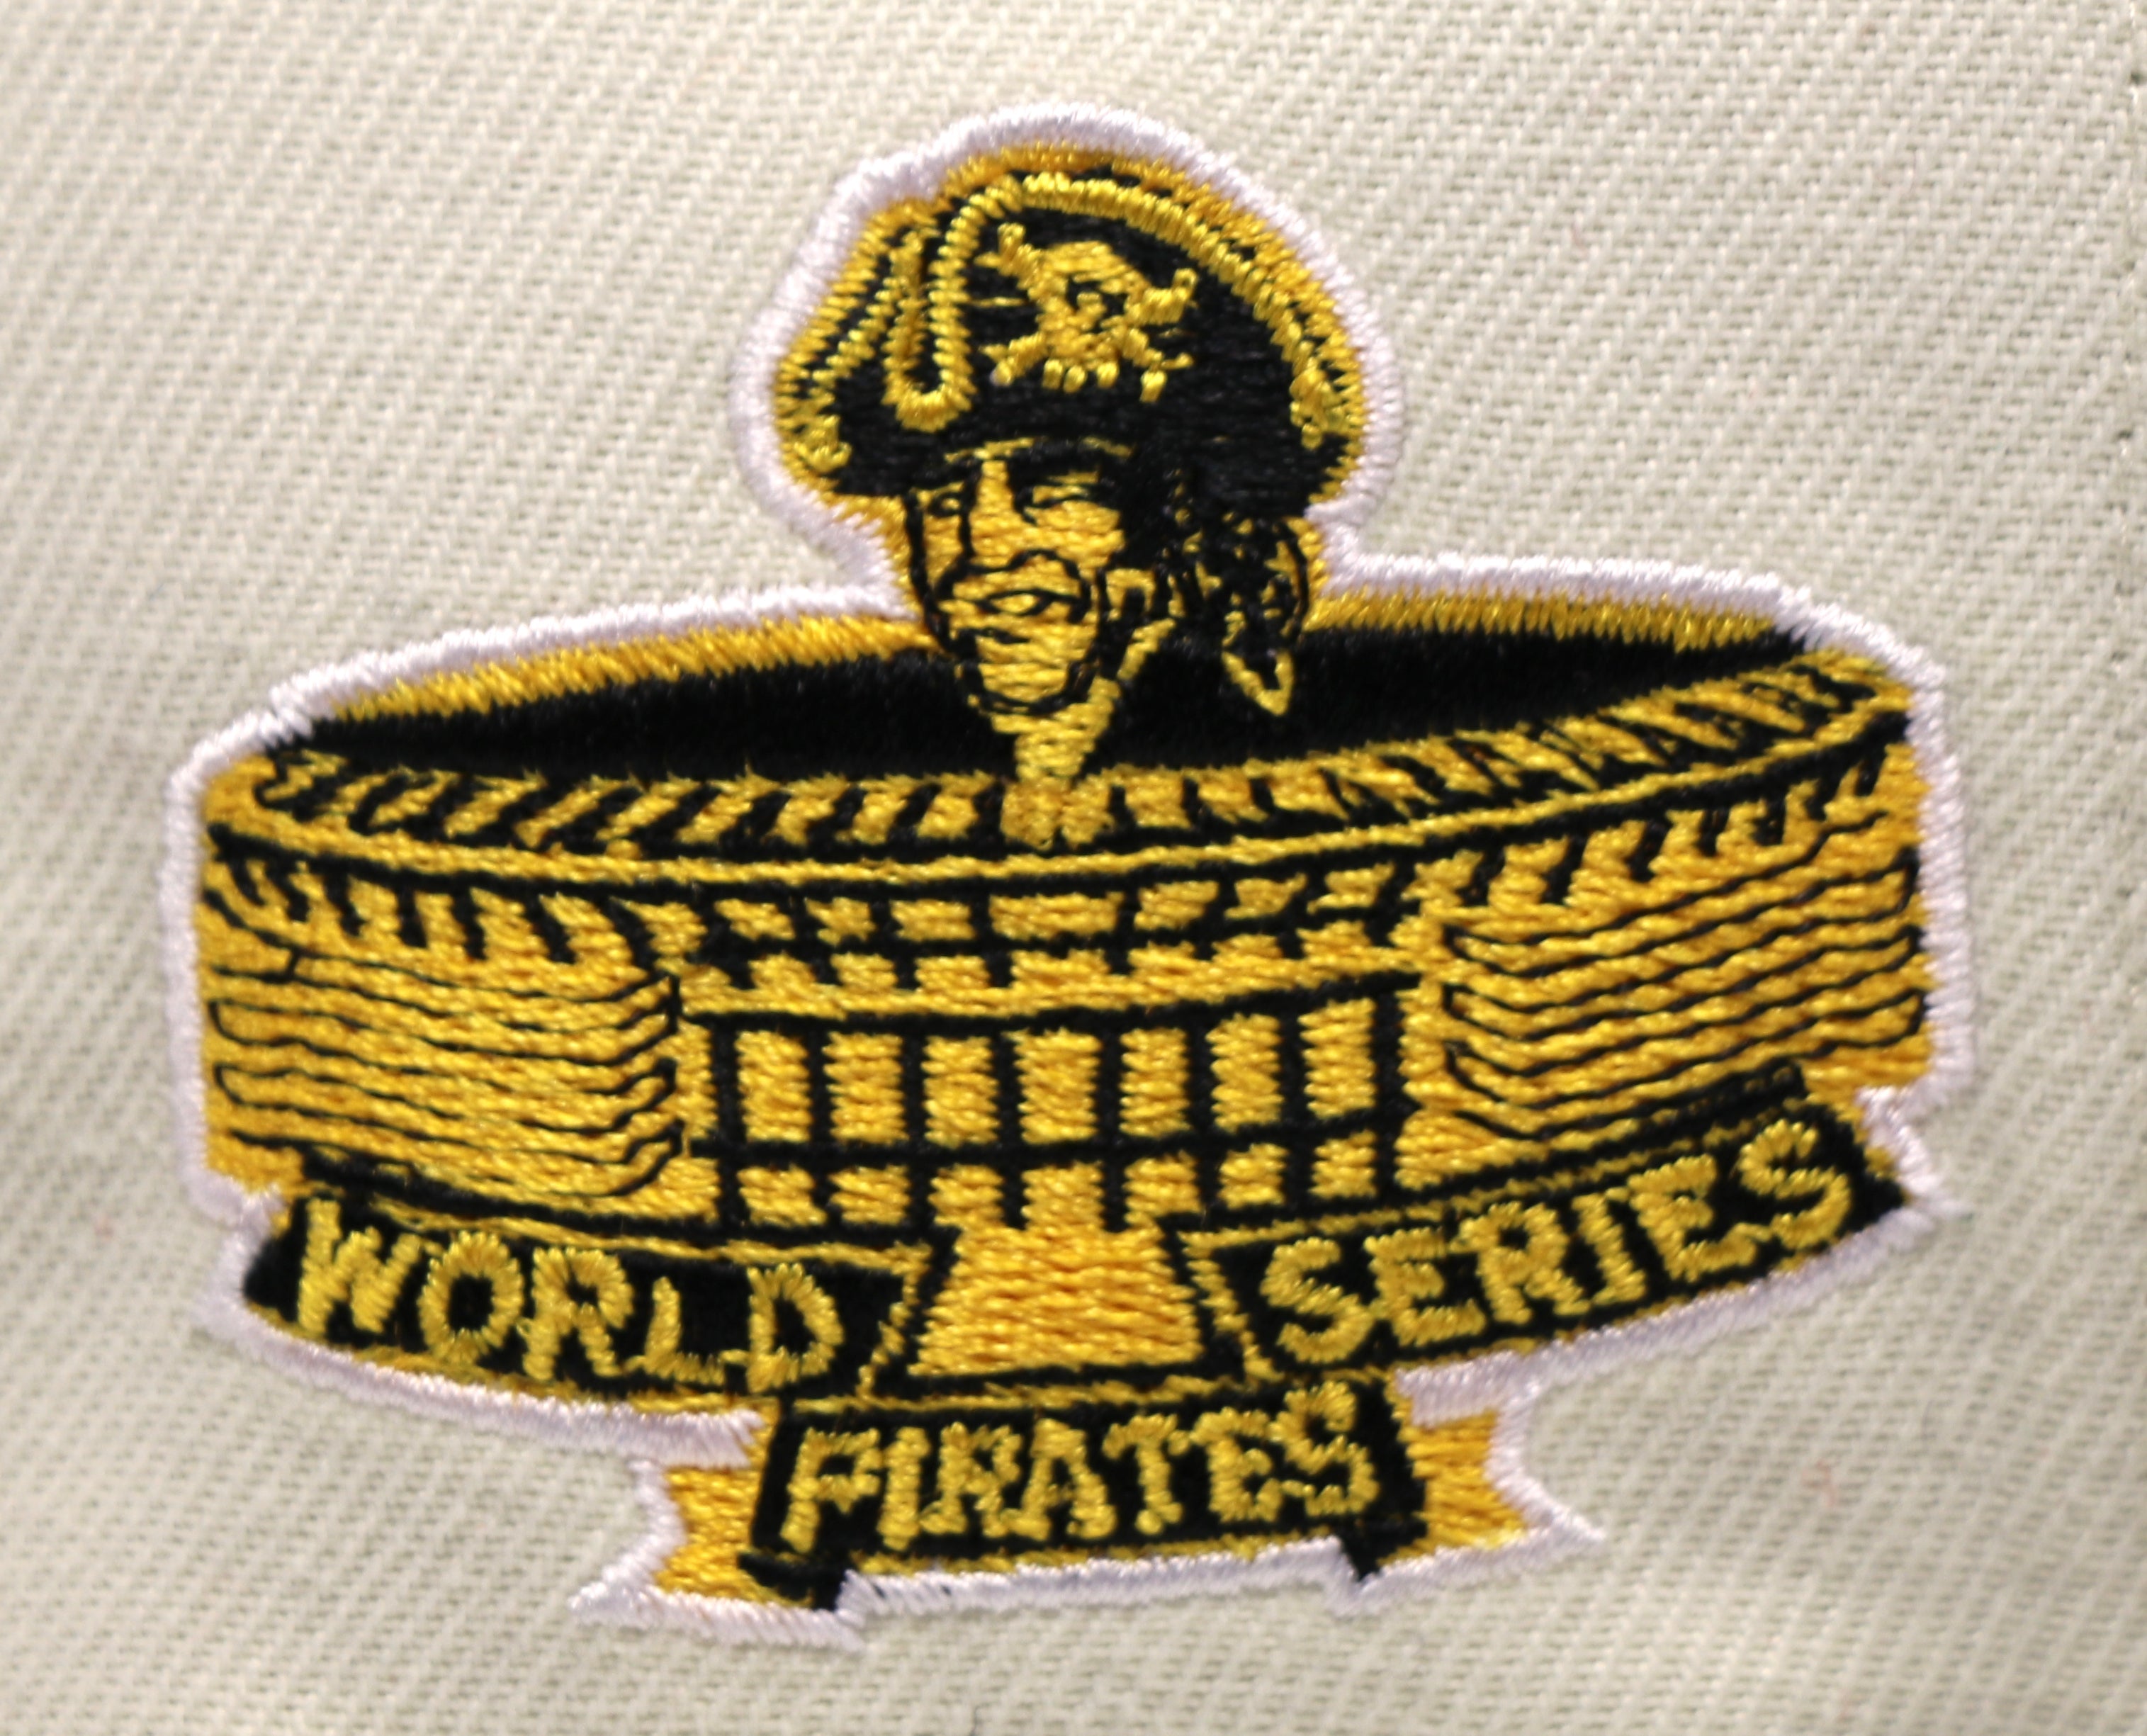 PITTSBURGH PIRATES (OFF-WHITE) (1971 ALT WORLD SERIES) NEW ERA 59FIFTY FITTED (GREEN UNDER VISOR)